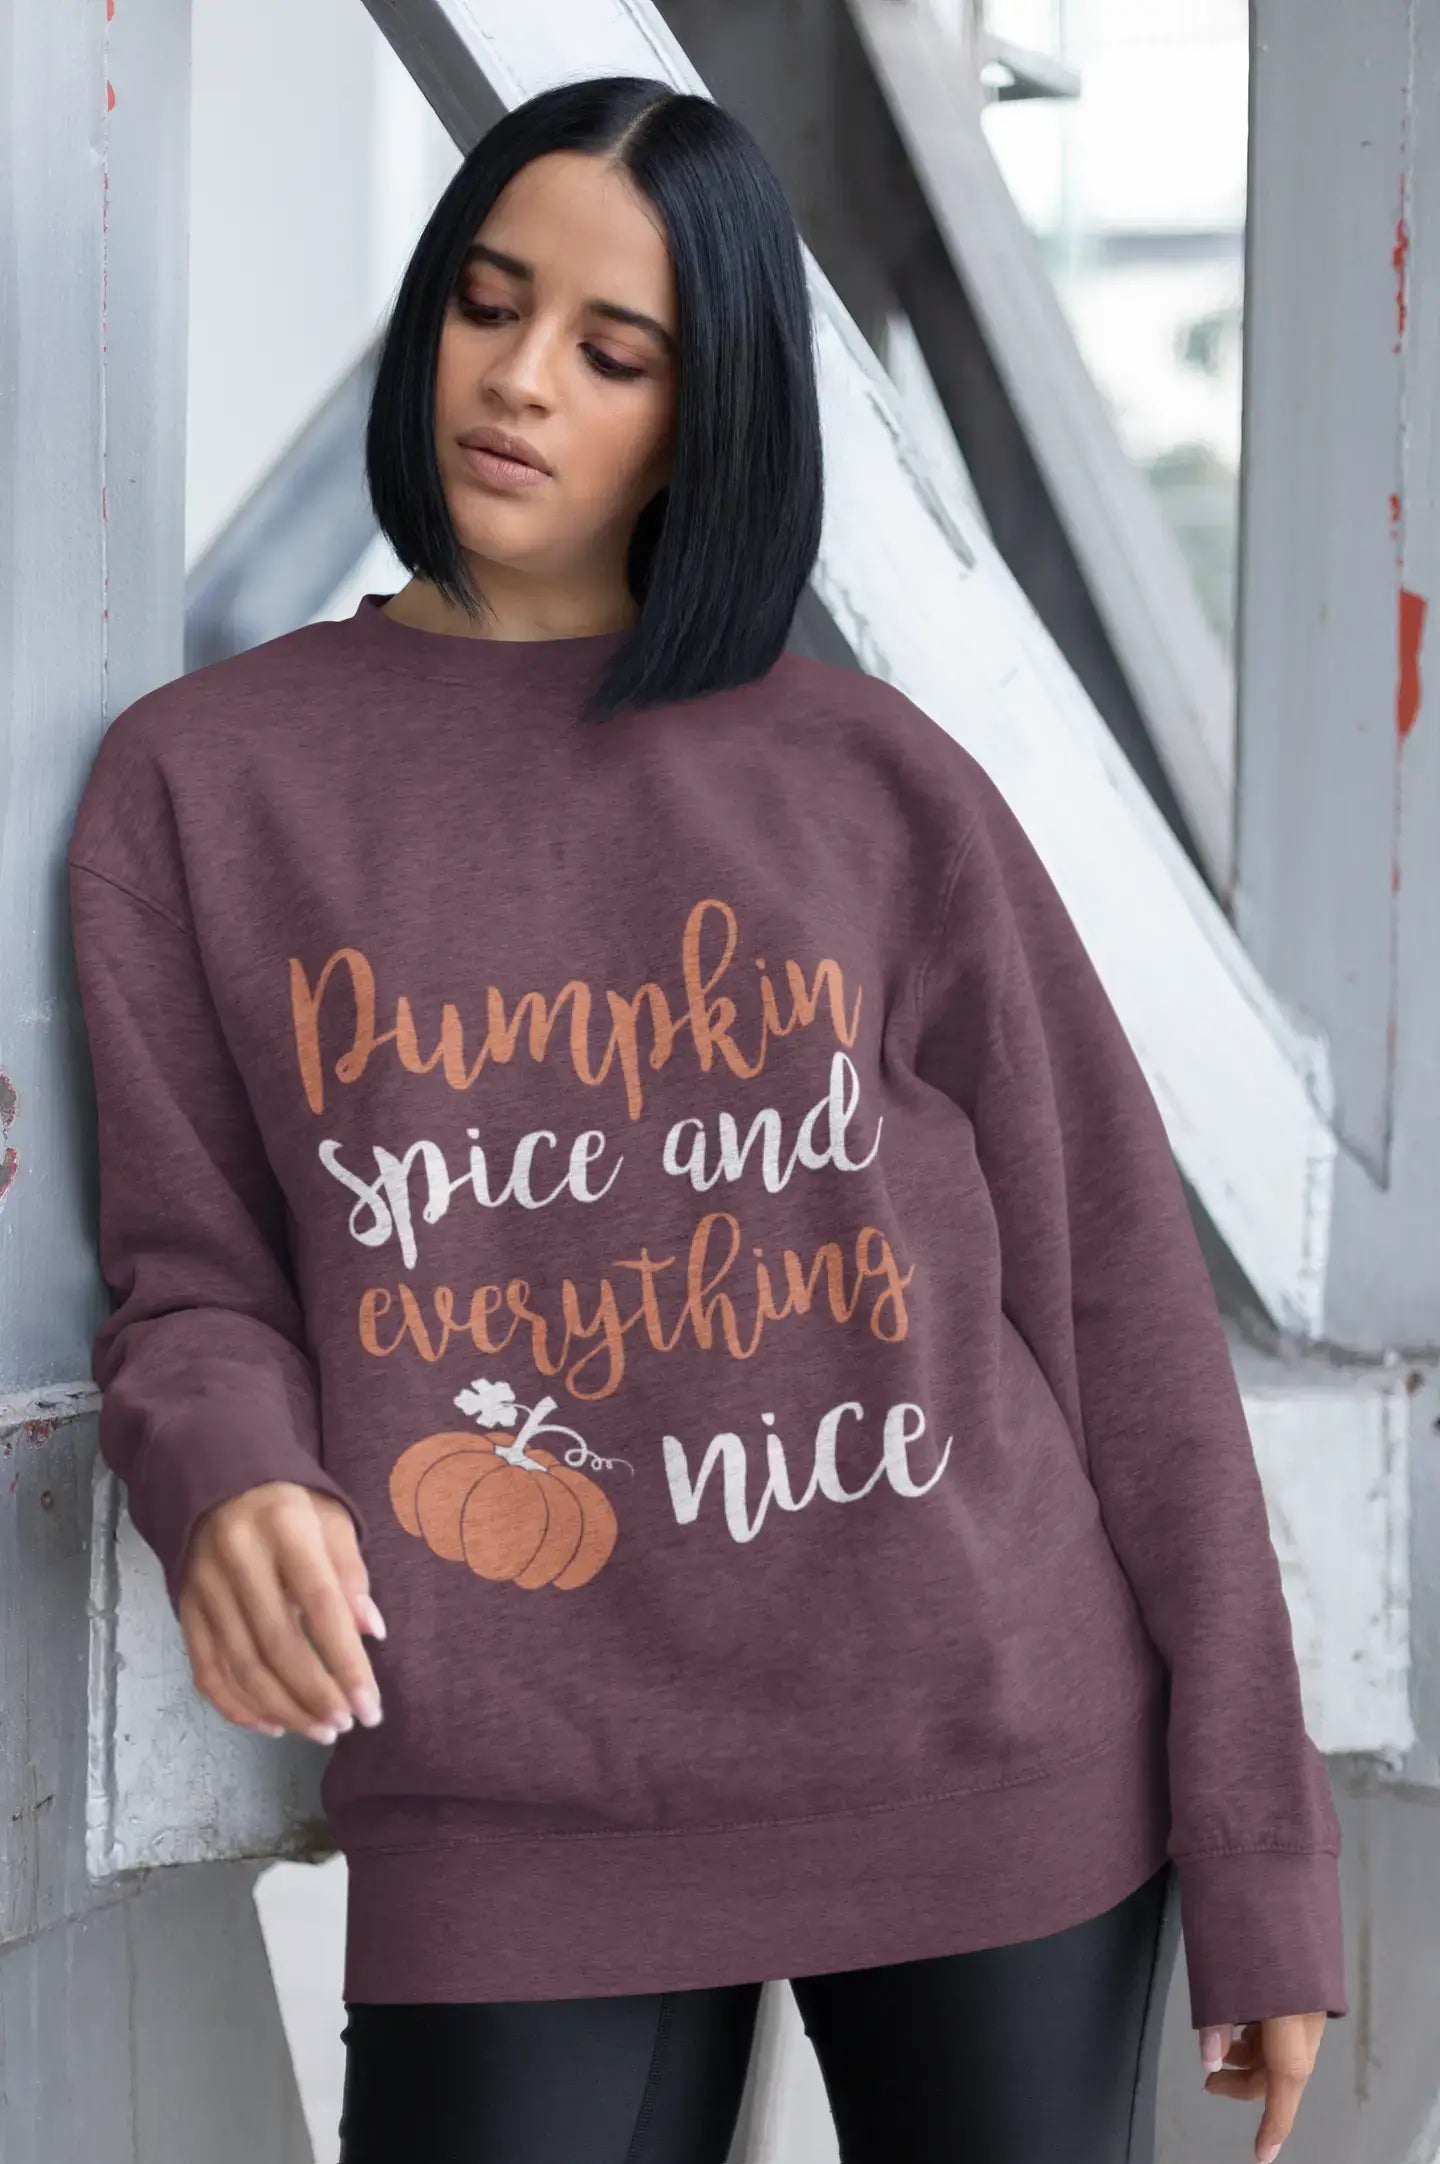 ULTRABASIC - Women's Printed Graphic Sweatshirt Pumpkin Spice And Everything Nice T-Shirt Cute Casual Letter Print Tee Burgundy